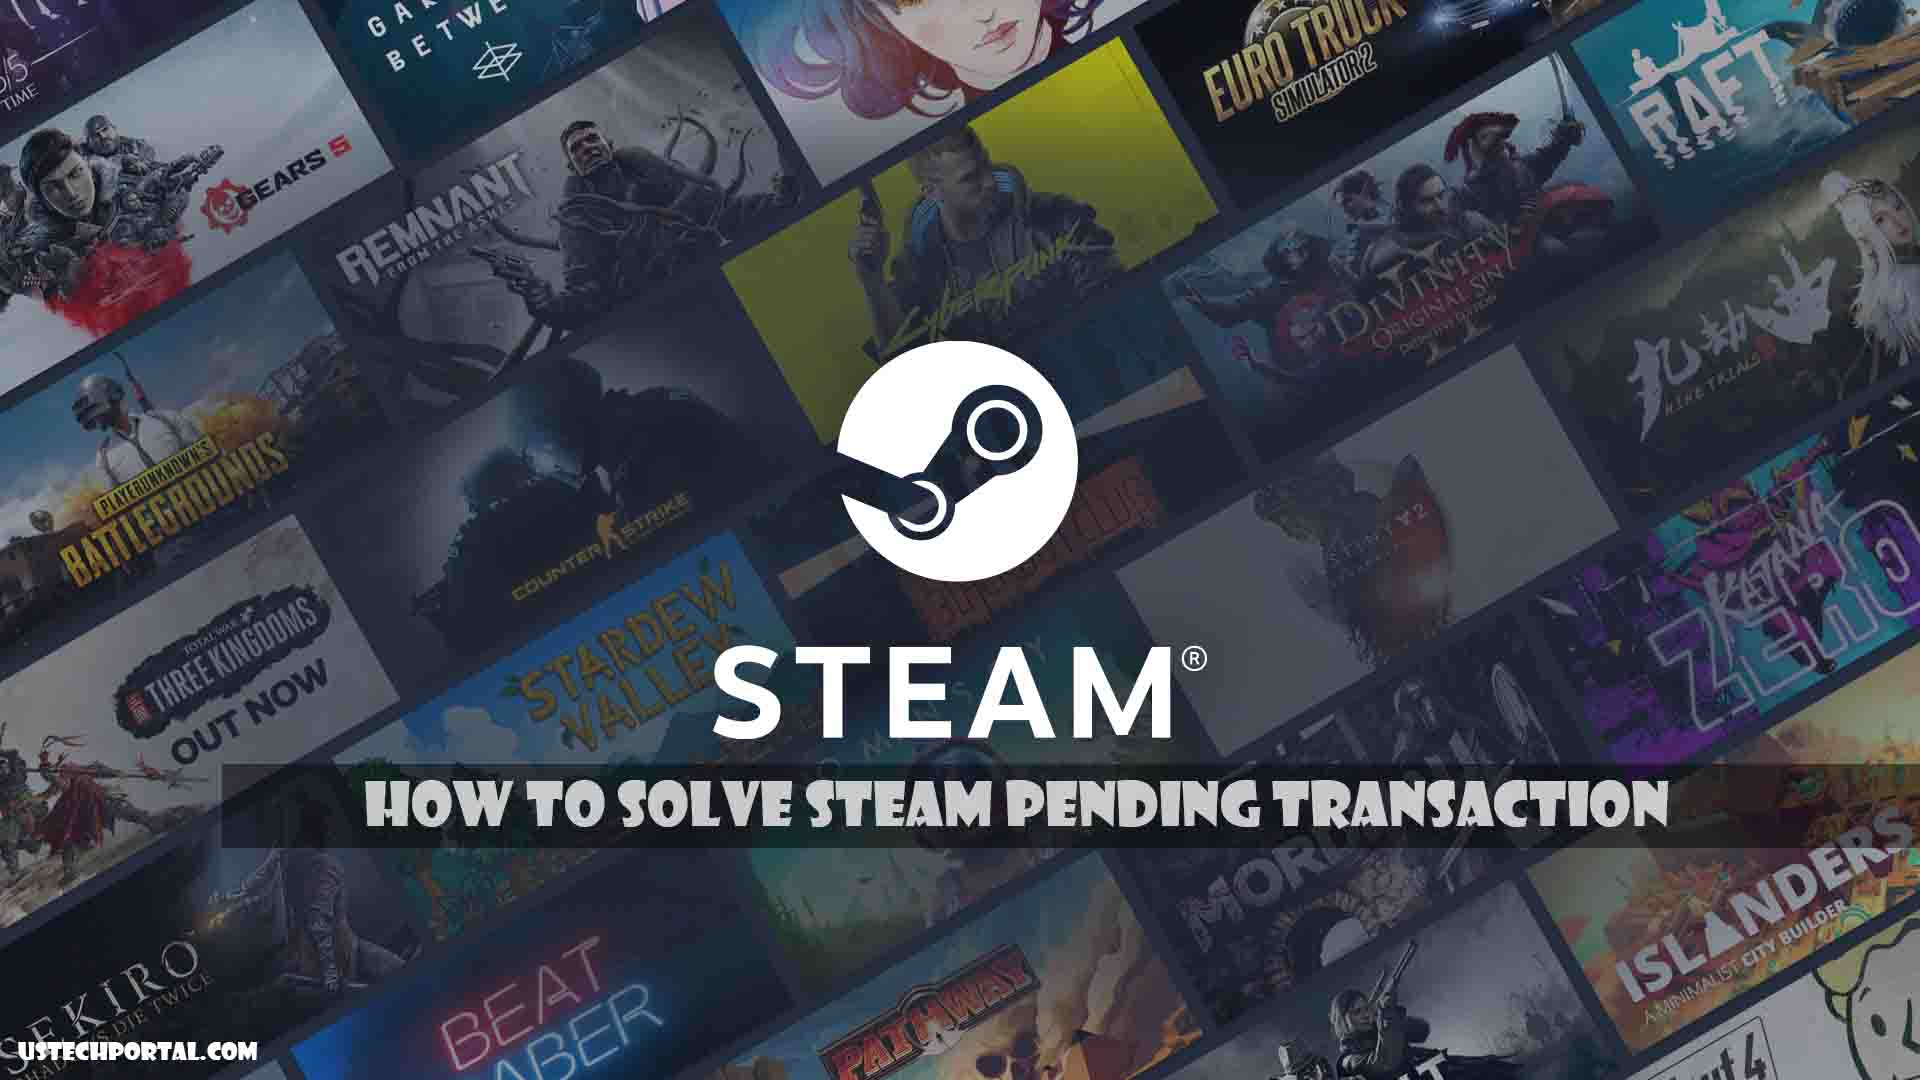 How to Solve Steam Pending Transaction